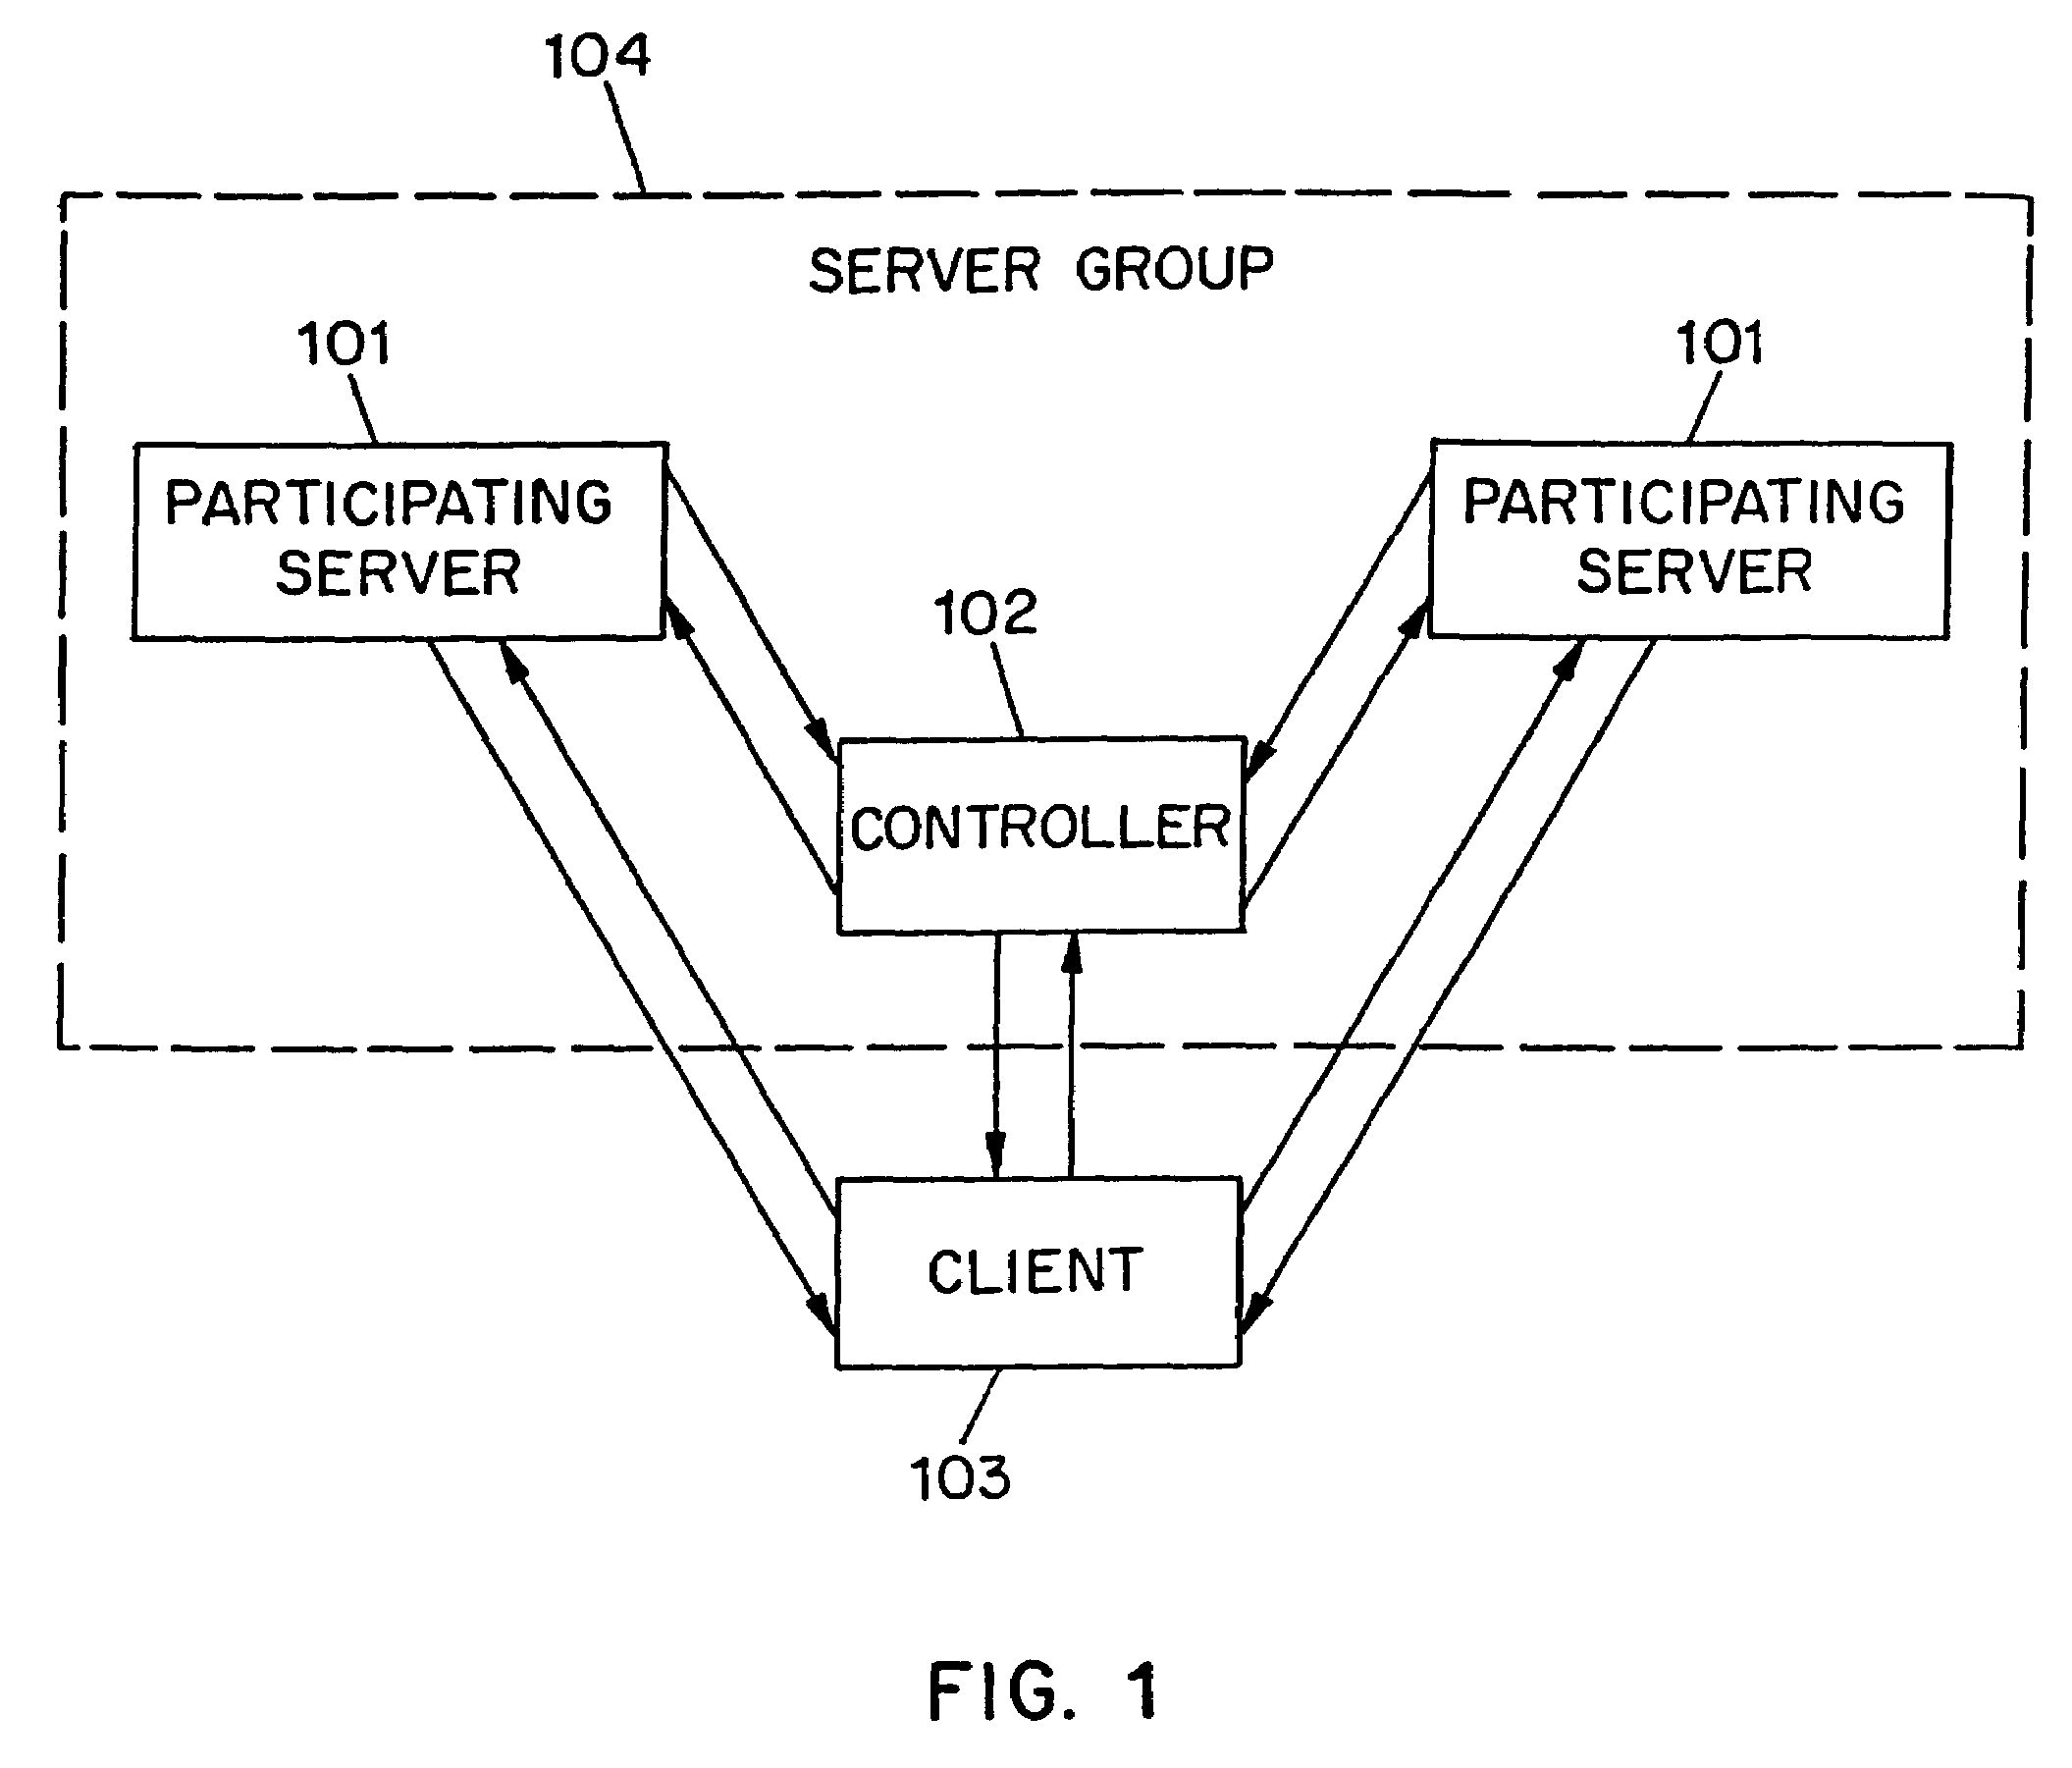 Method for coordinating actions among a group of servers